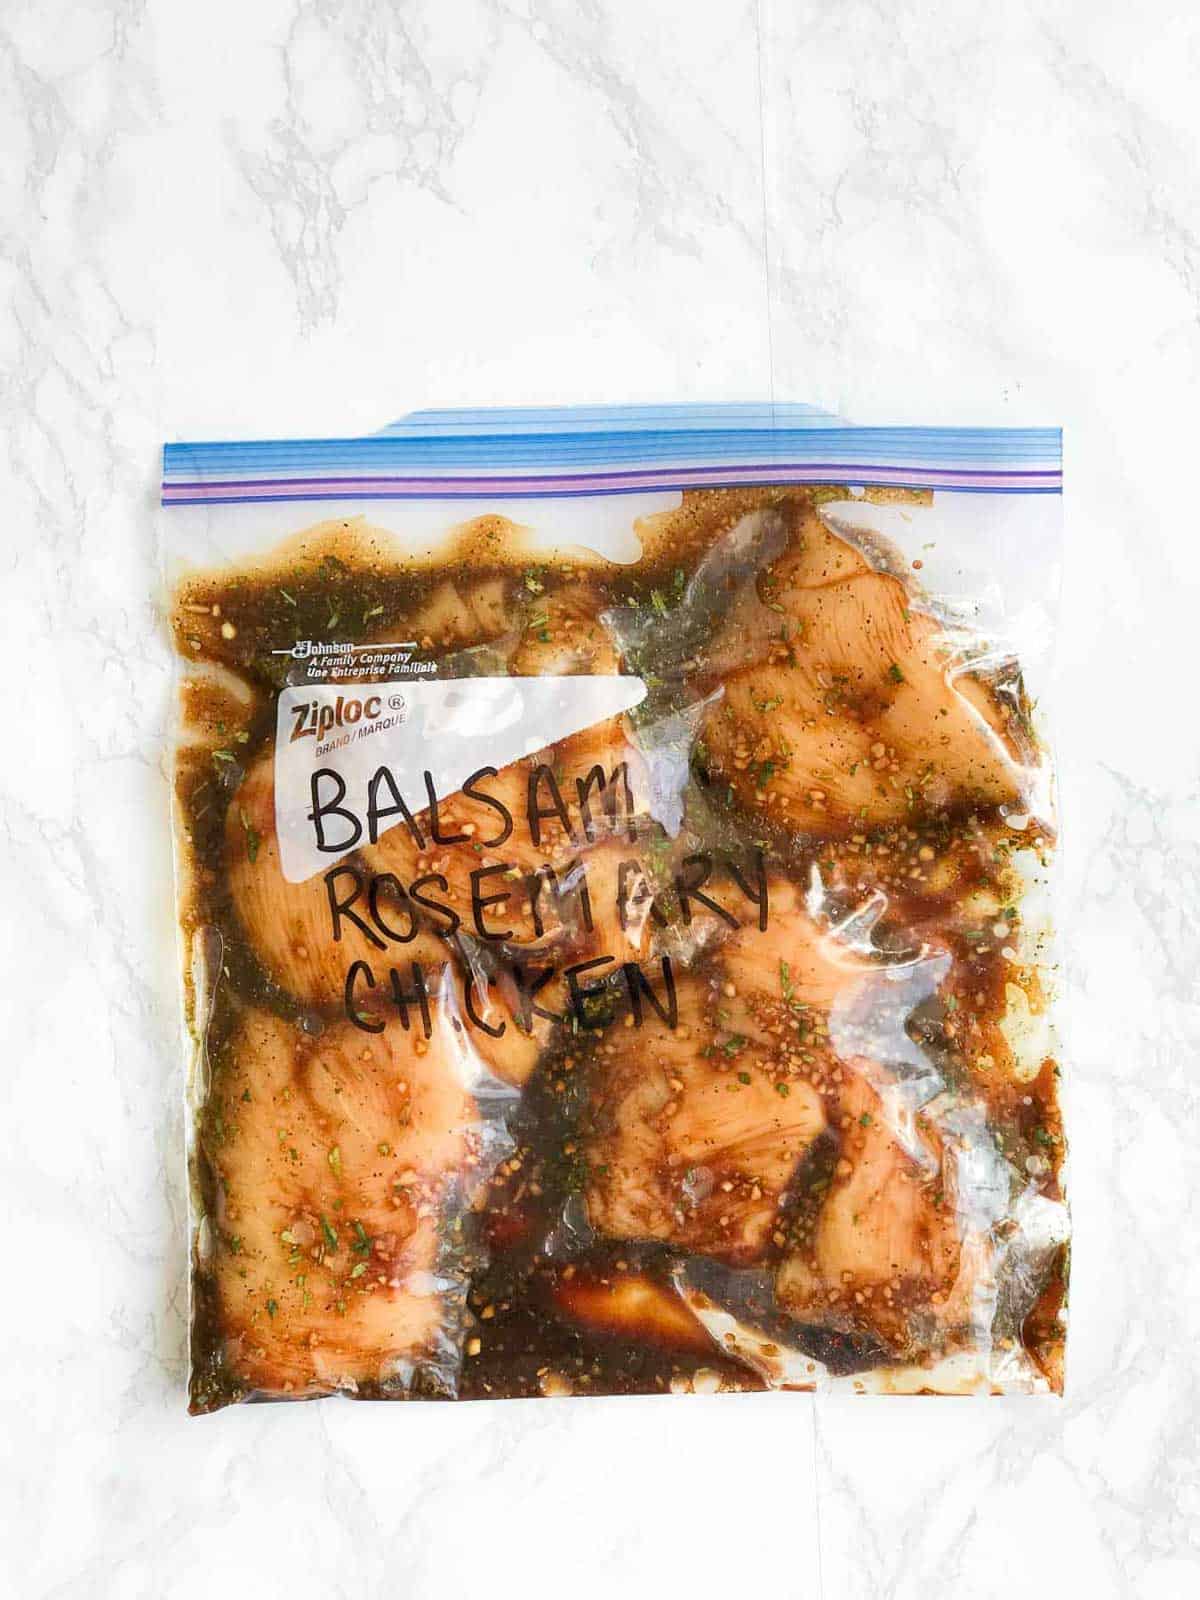 Balsamic Rosemary Chicken freezer meal in a freezer bag.